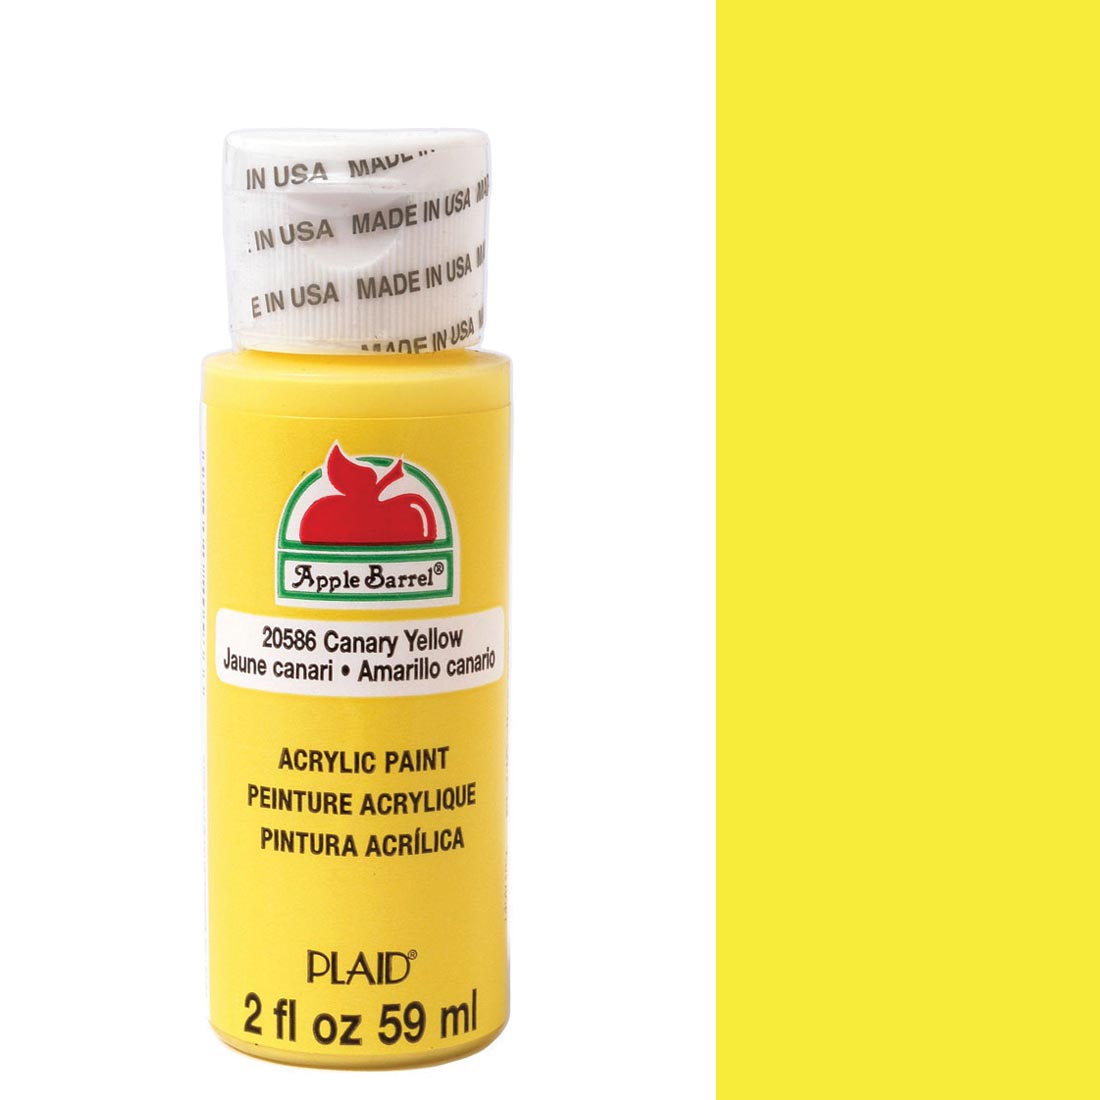 Canary Yellow Apple Barrel Acrylic Craft Paint bottle next to its color swatch